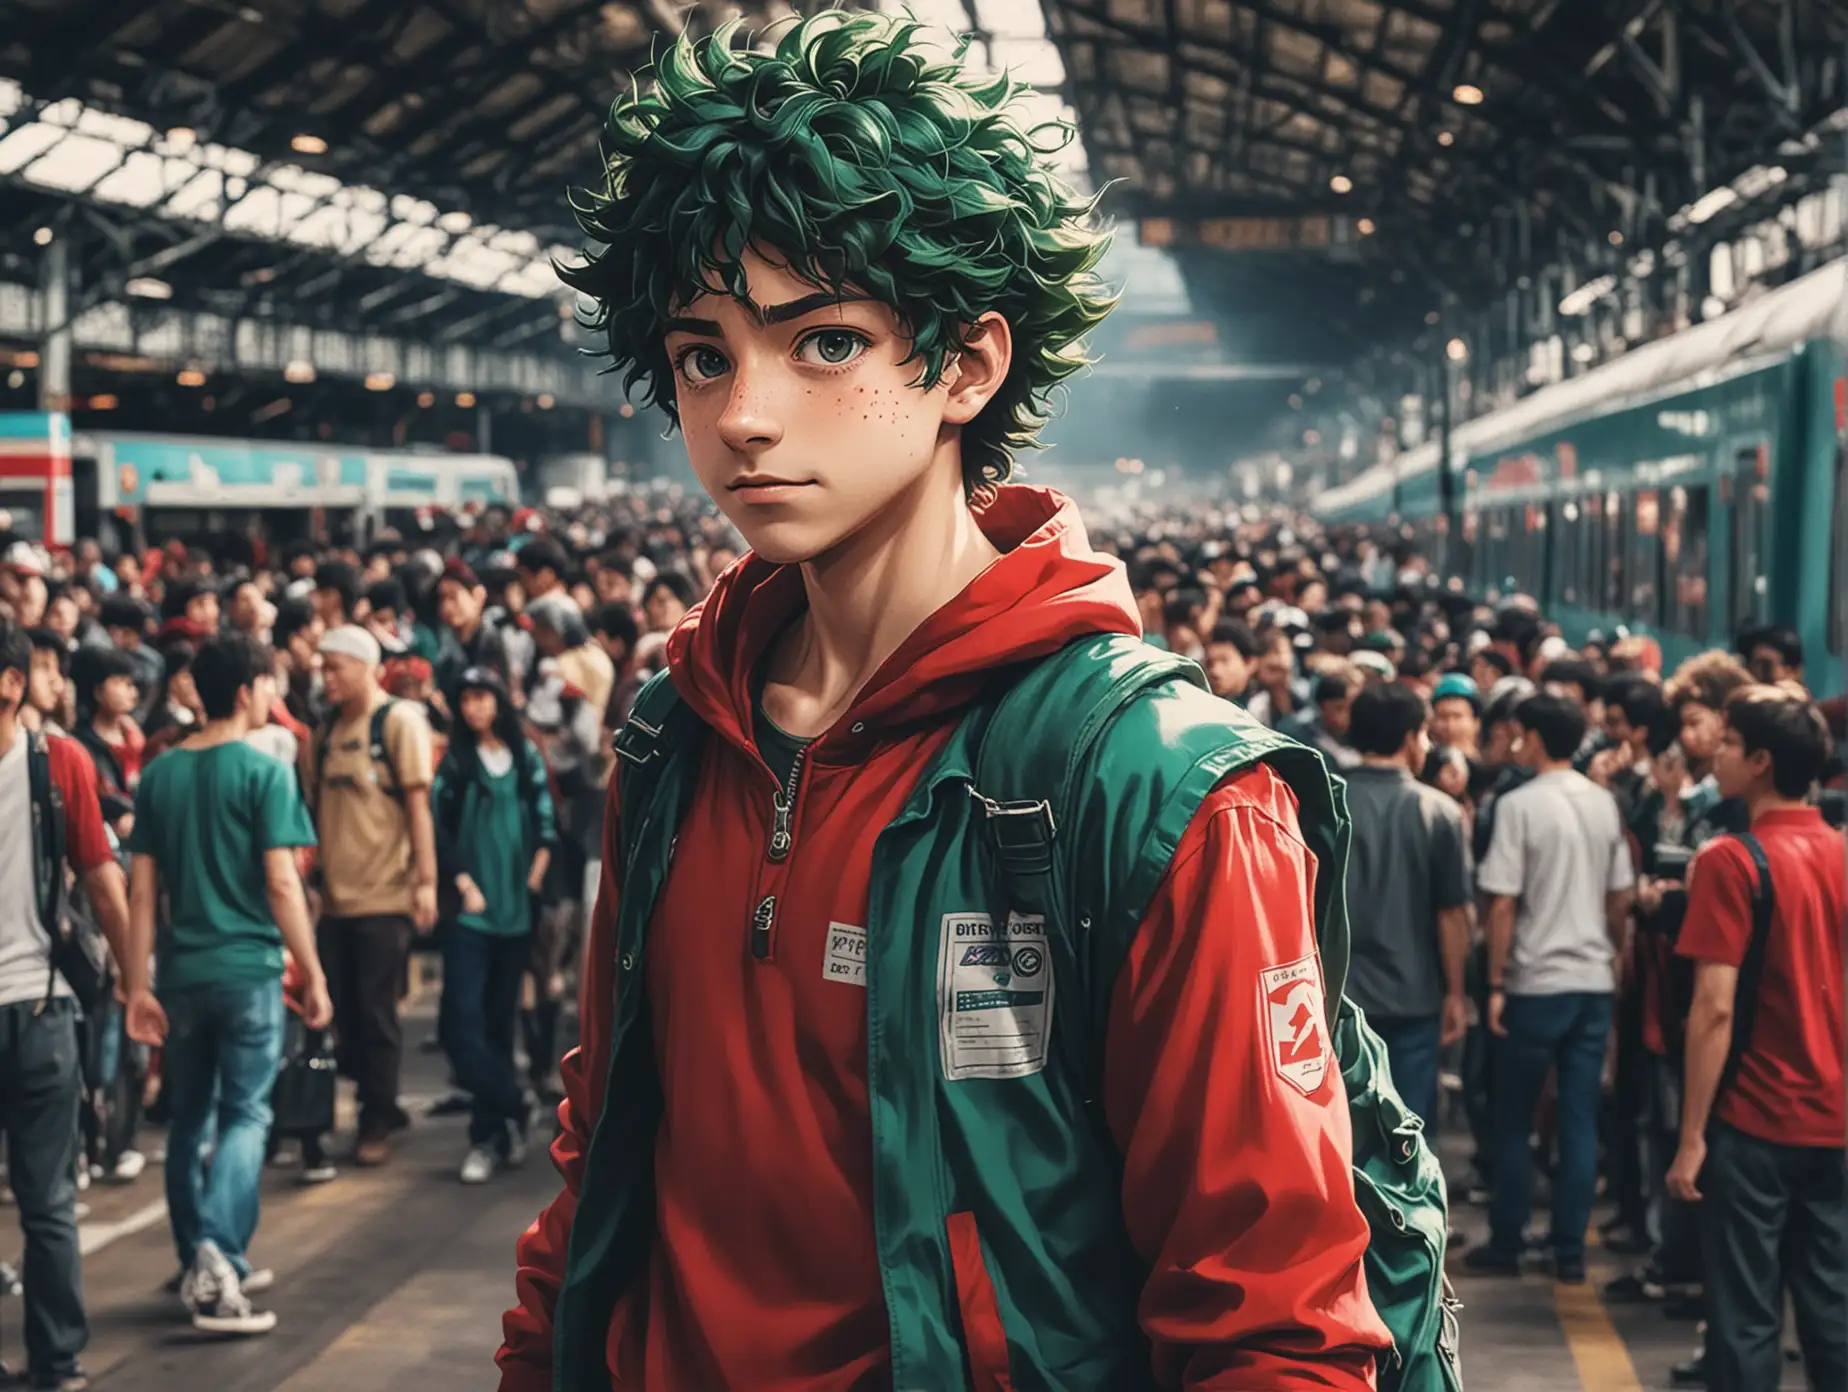 man in red in middle, looks like Izuku Midoriya, is on train station, amoung the crowd, in the background, and prepare to enter in the train, in anime style